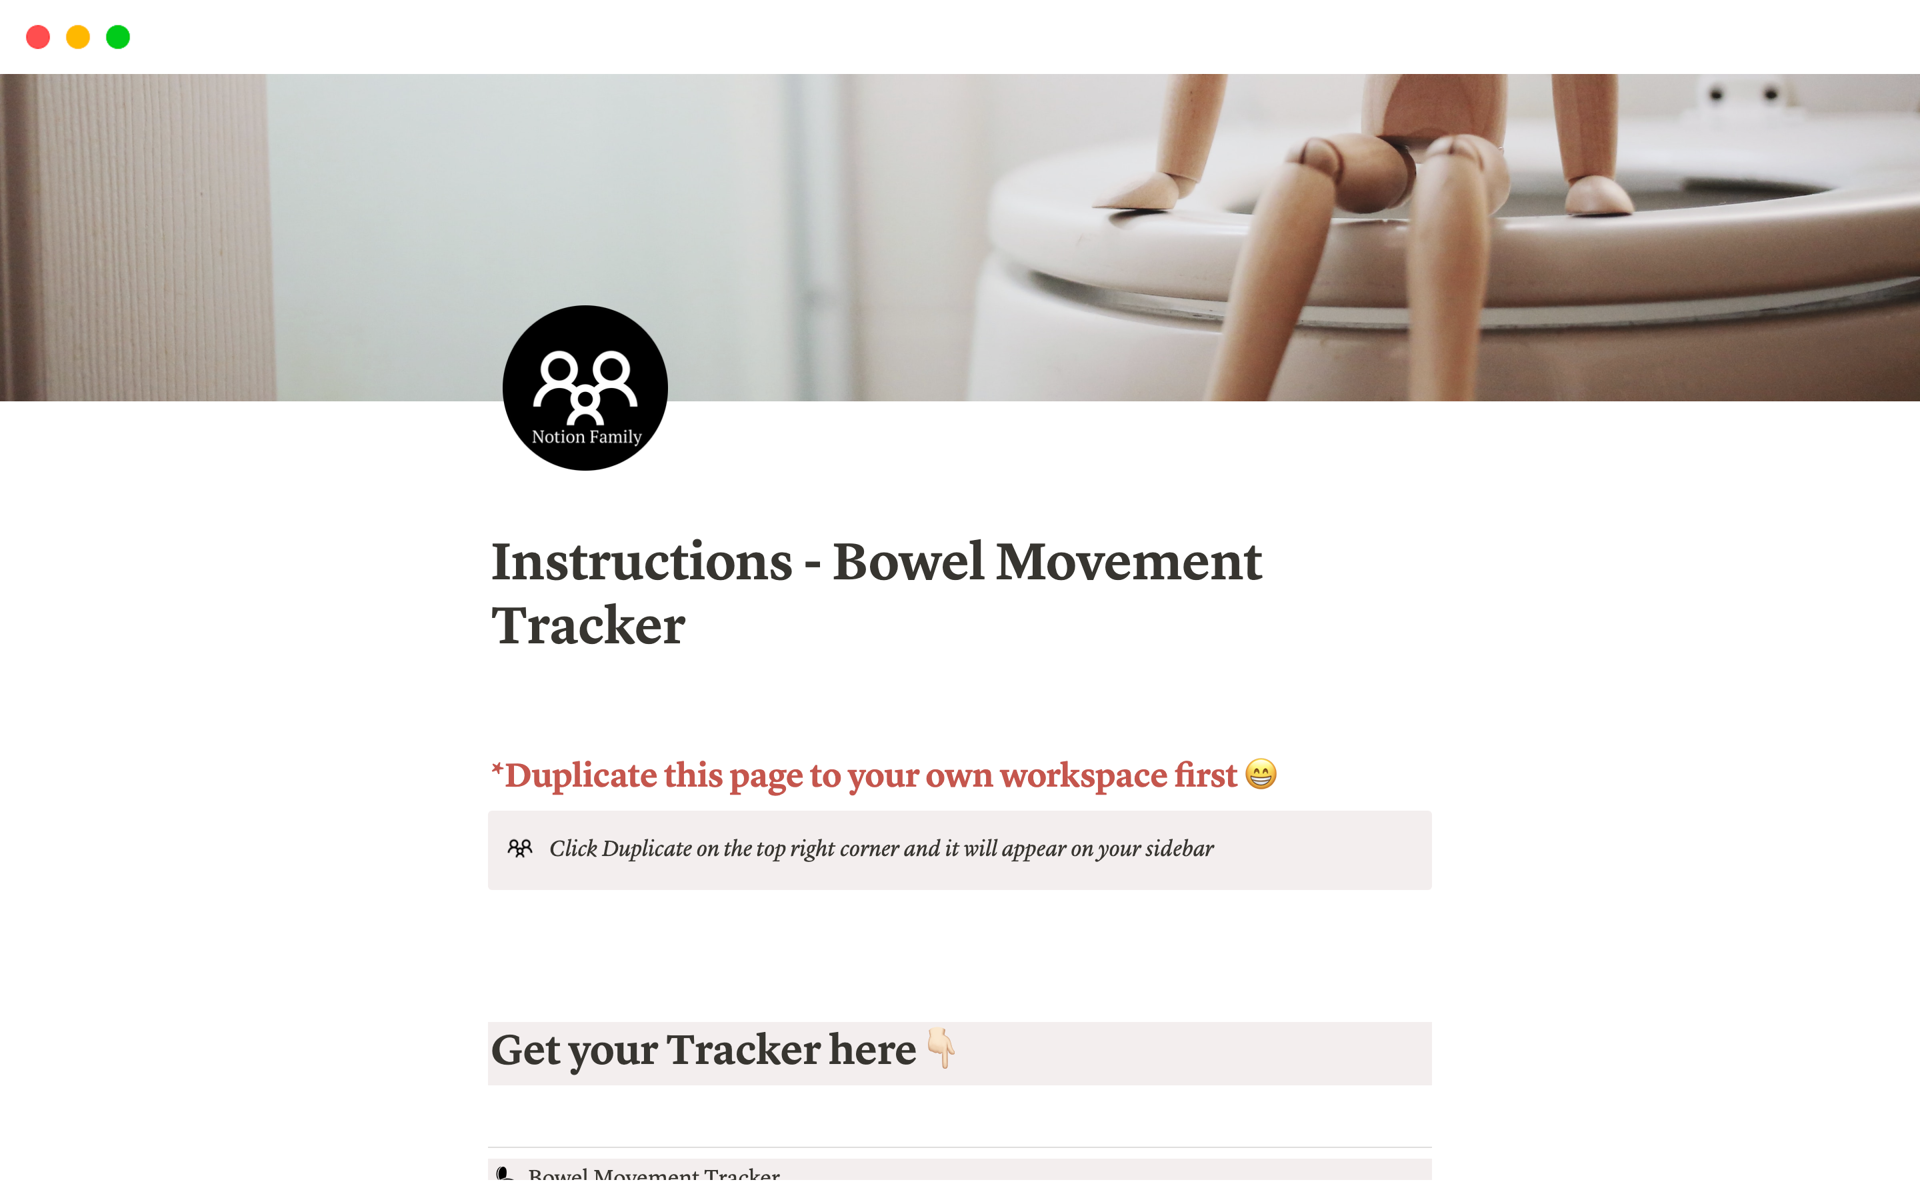 Affectionately known as the "Poo Tracker," this tool allows you to monitor all of your bowel movements in detail and share them with a physician!